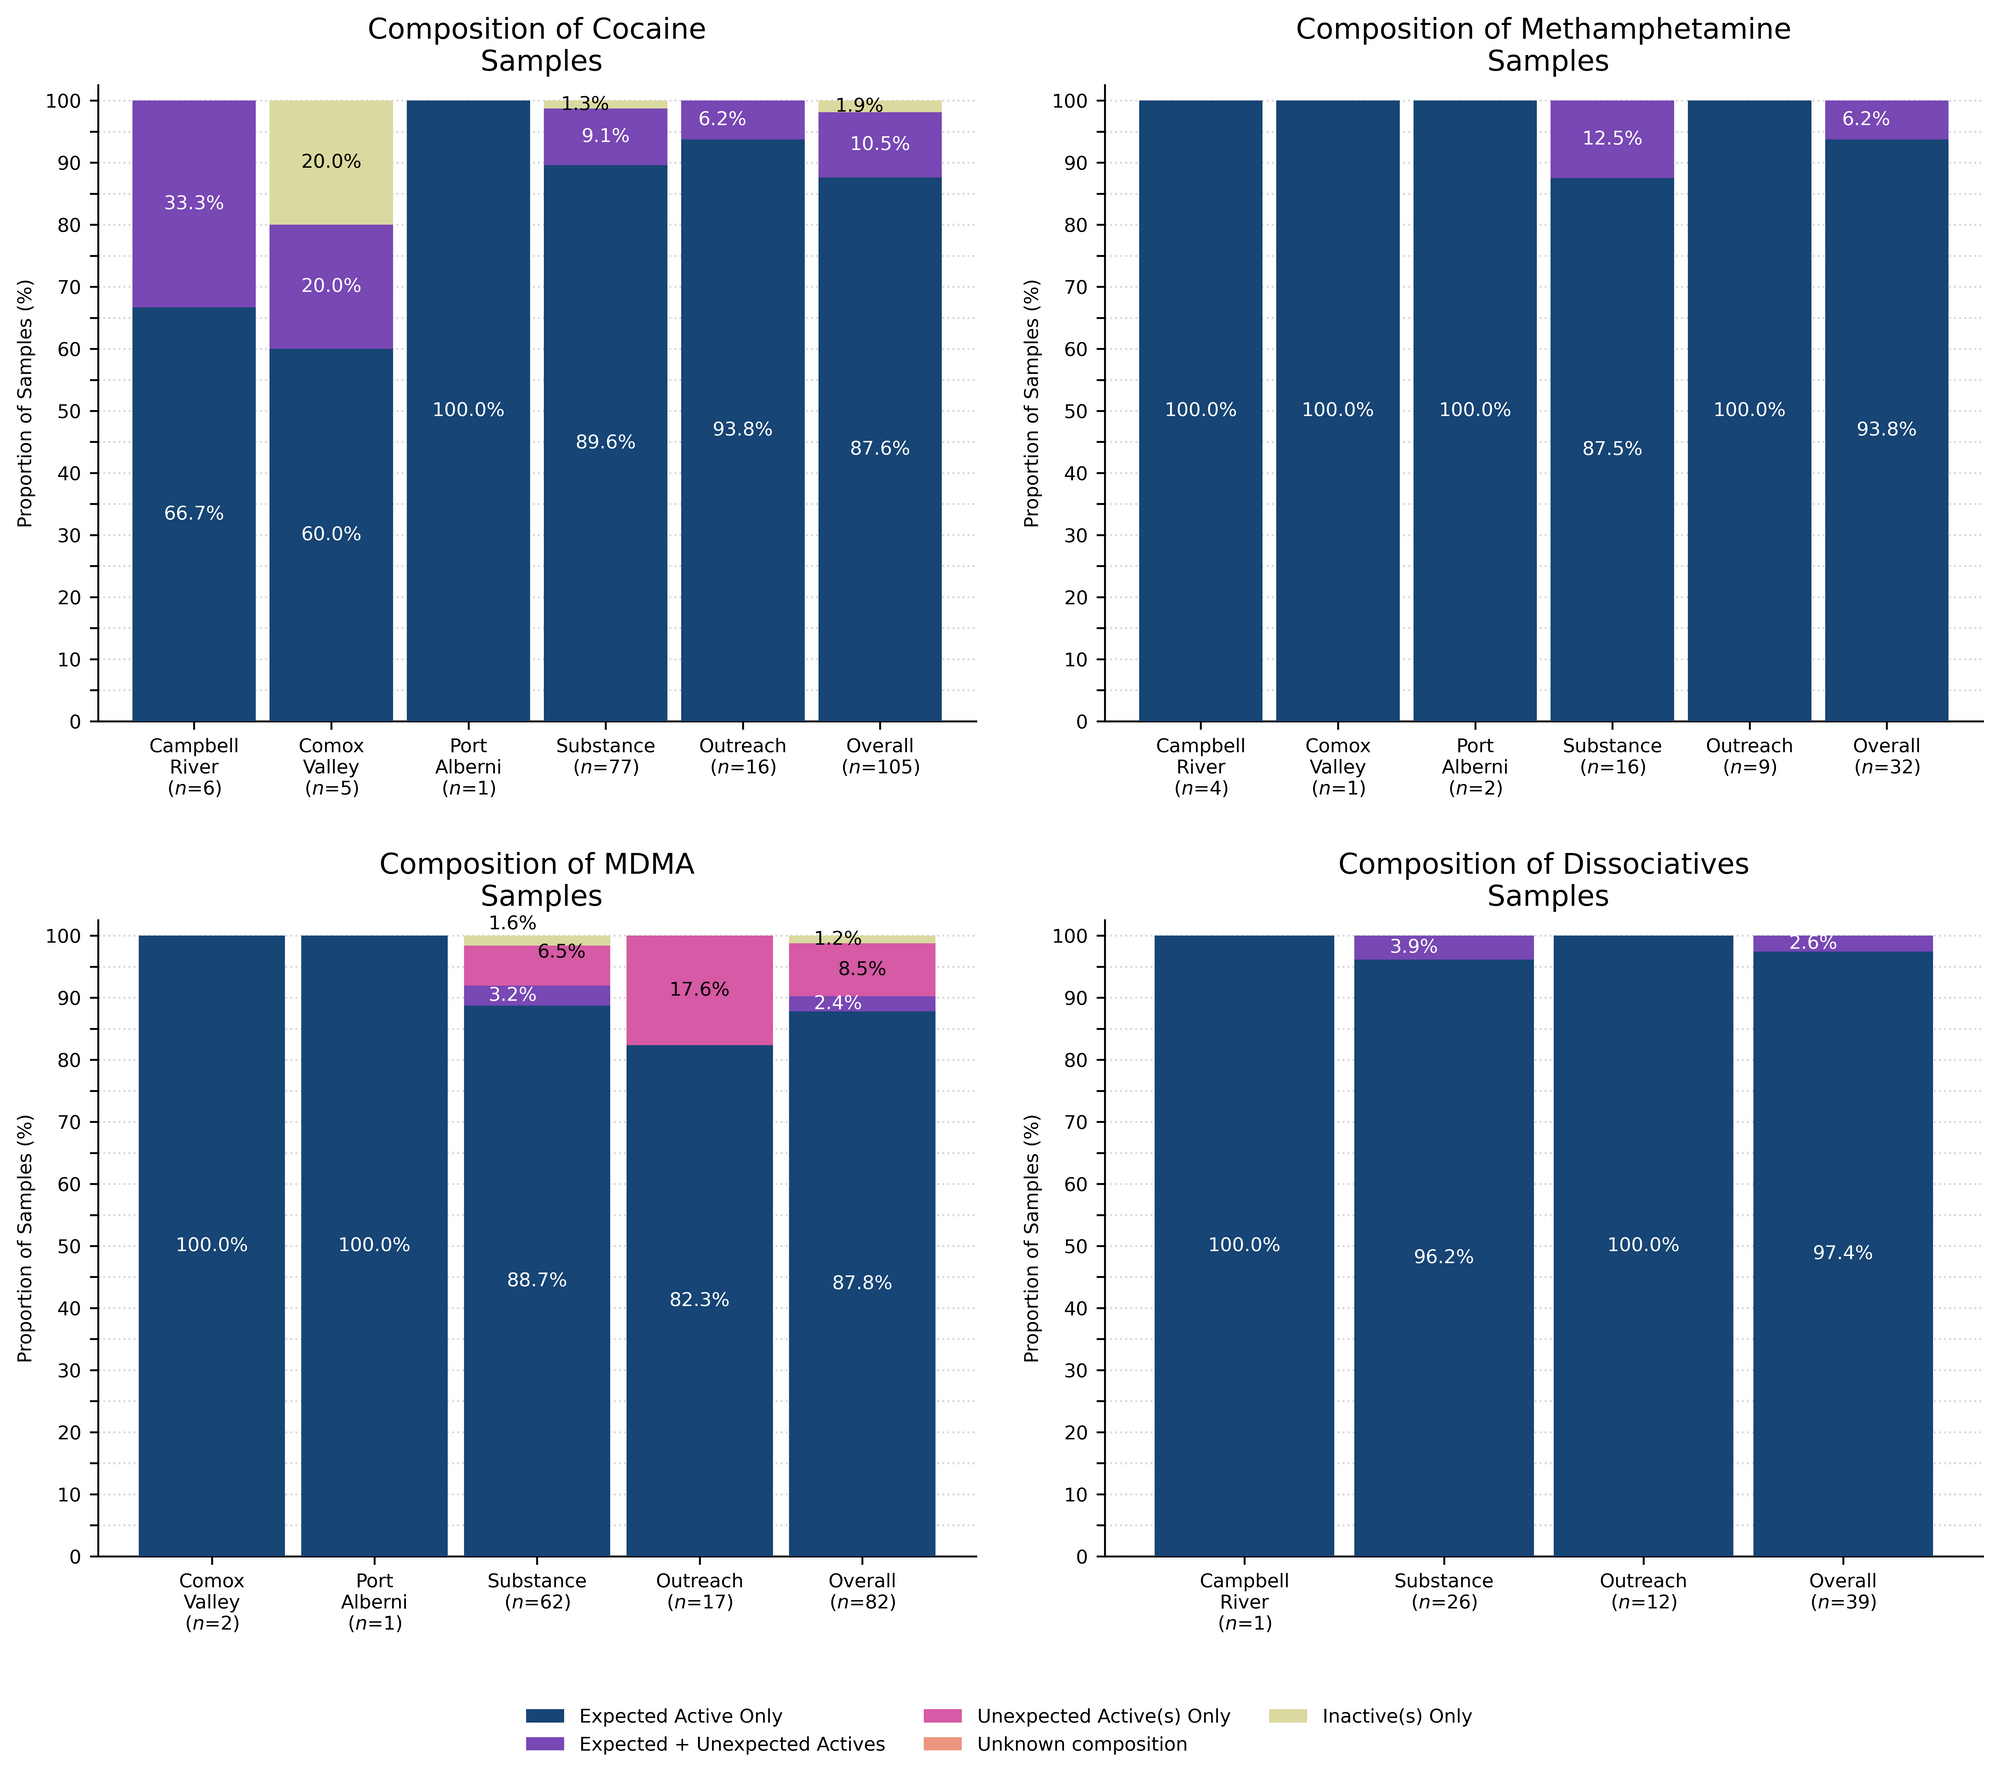 Figure 2. Compositional breakdown by drug class and sample collection location/method. Bars are stacked by the percentage of samples in each category, with the relative proportions overlaid. Proportions less than 1% are not overlaid for clarity. “Dark Blue” groups samples that were *as expected* with no other notable compounds detected, “Purple” groups samples that contained the expected drug and contained other unexpected active(s), “Magenta” groups samples that did not contain the expected active but did contain unexpected active(s), Salmon groups samples where we were unable to determine the composition (e.g. scenarios where we do not have appropriate reference spectra), and Lime displays samples where no active compounds were detected